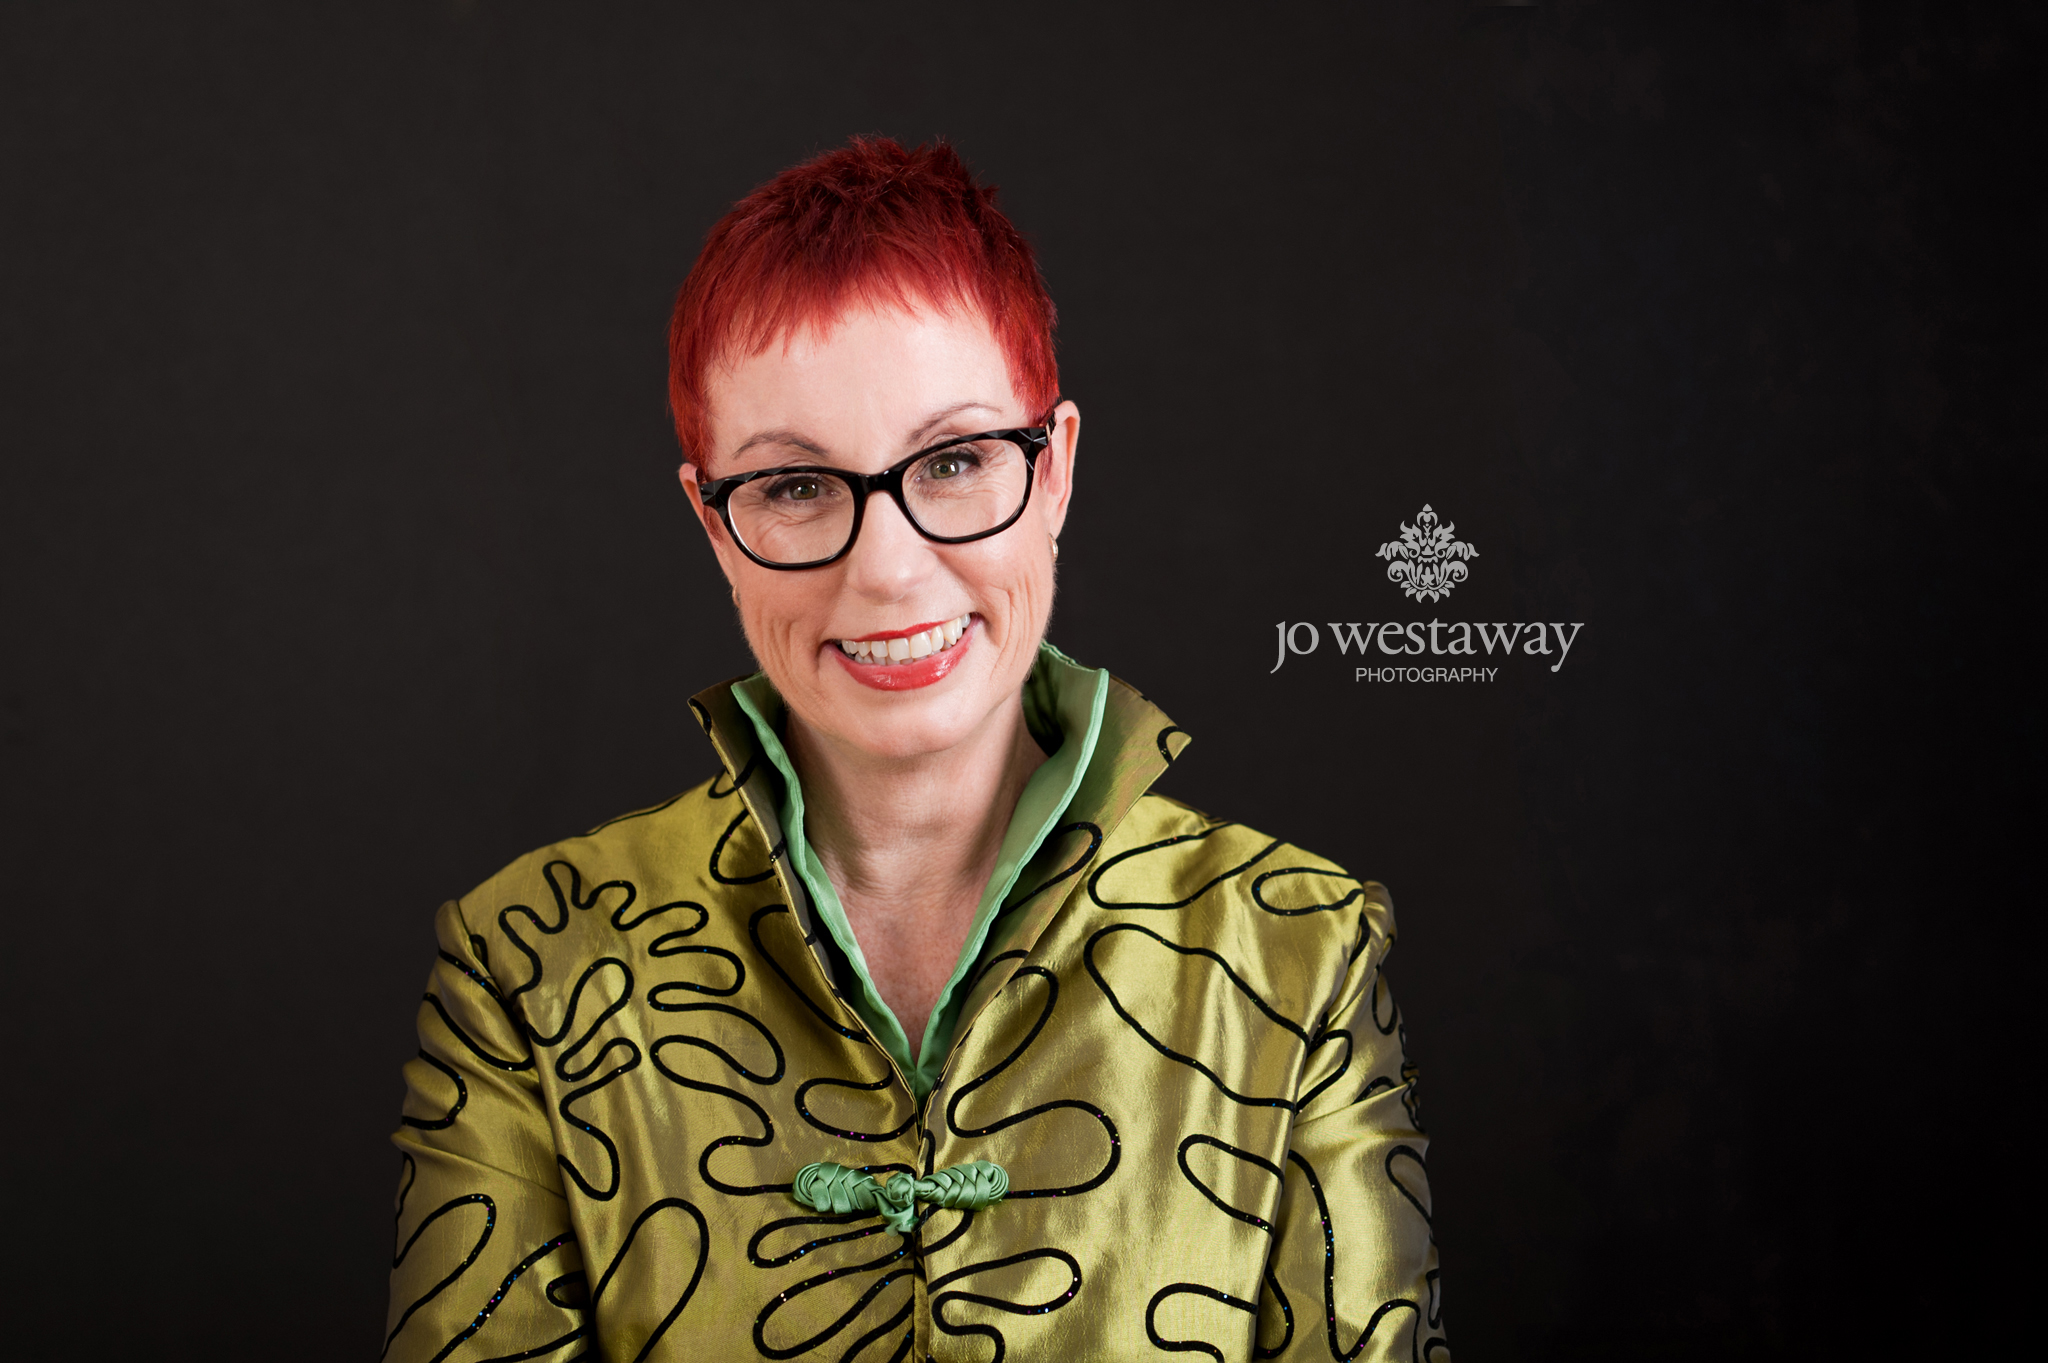 The best portriats and headshots for red heads - Brisbane's best personal brand photographer